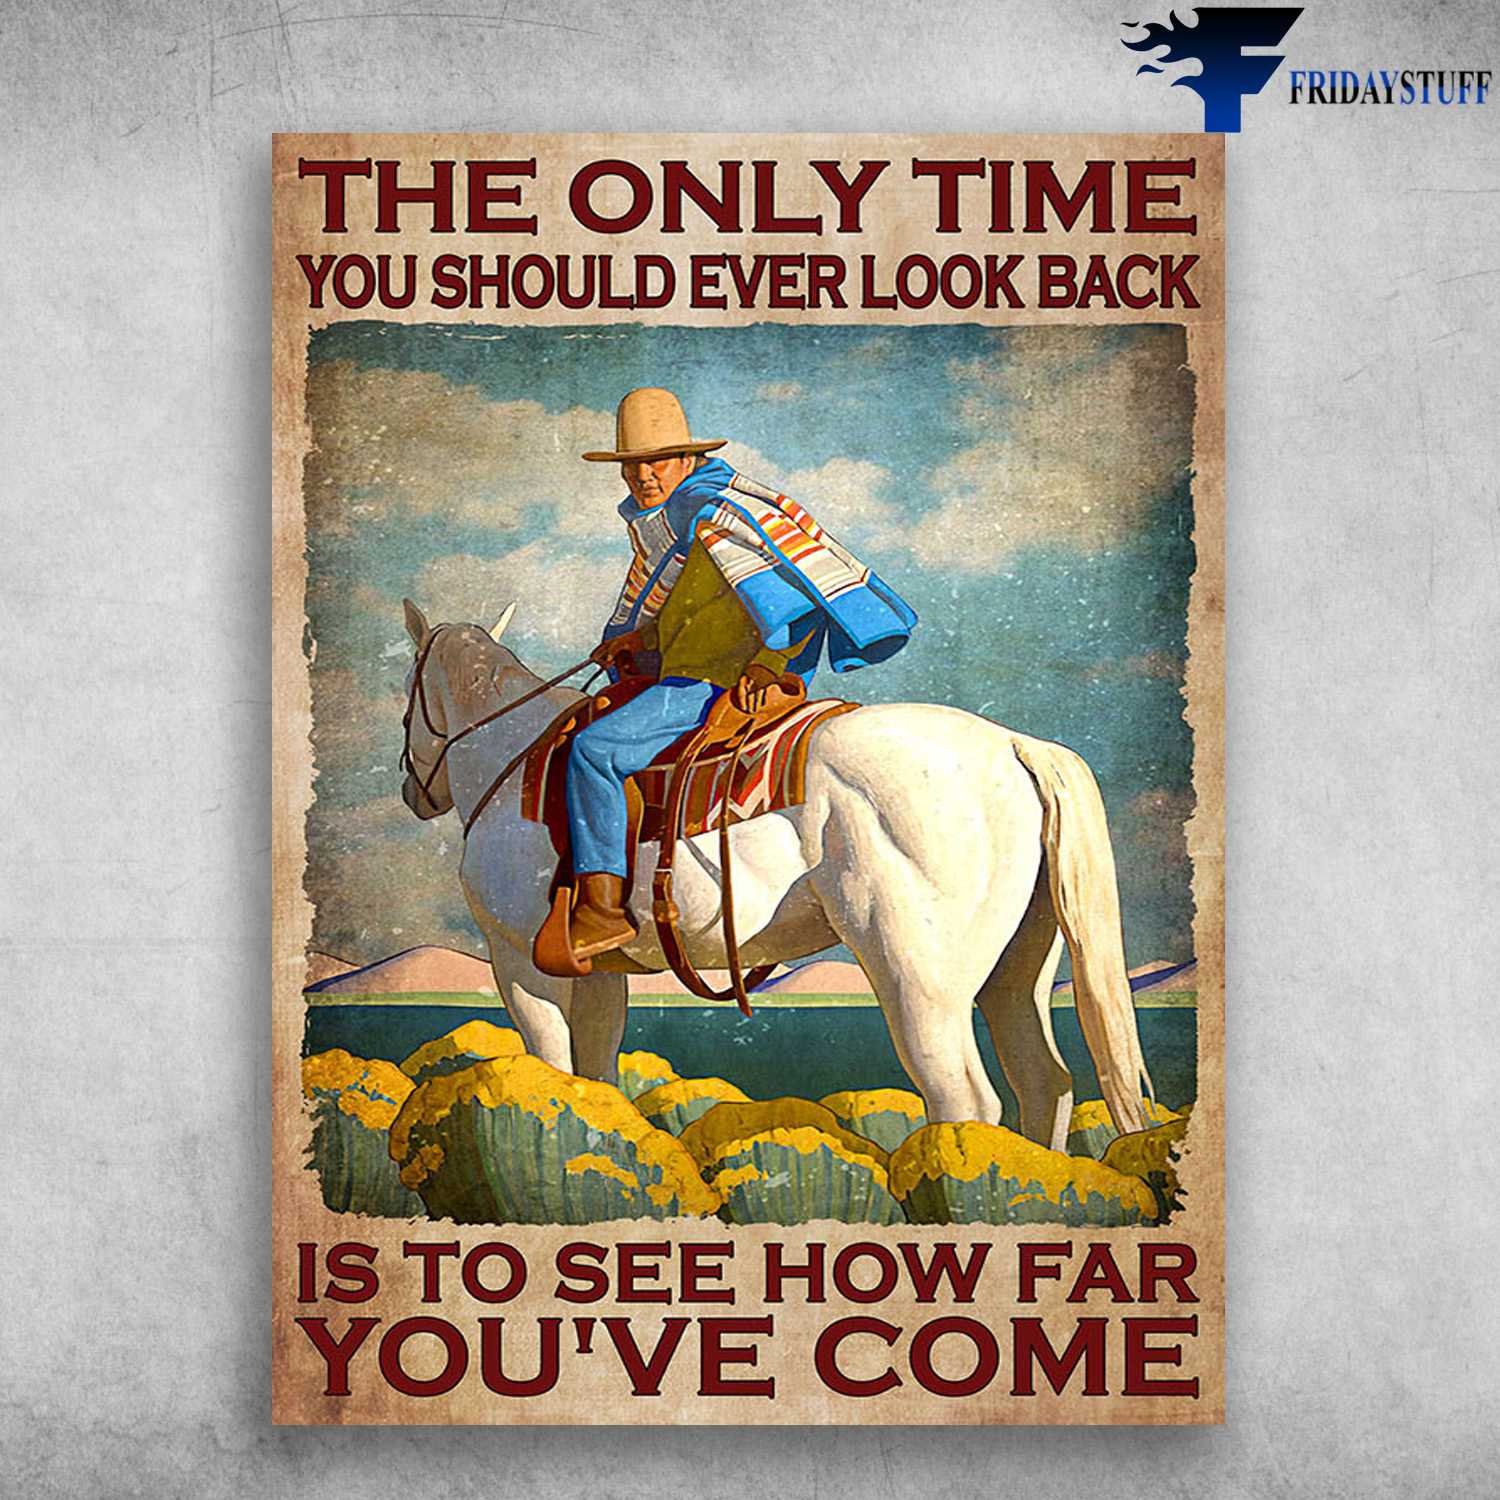 Cowboy And Horse, Horse Riding, The Only Time You Shound Ever Look Back, Is To See How Far You've Come